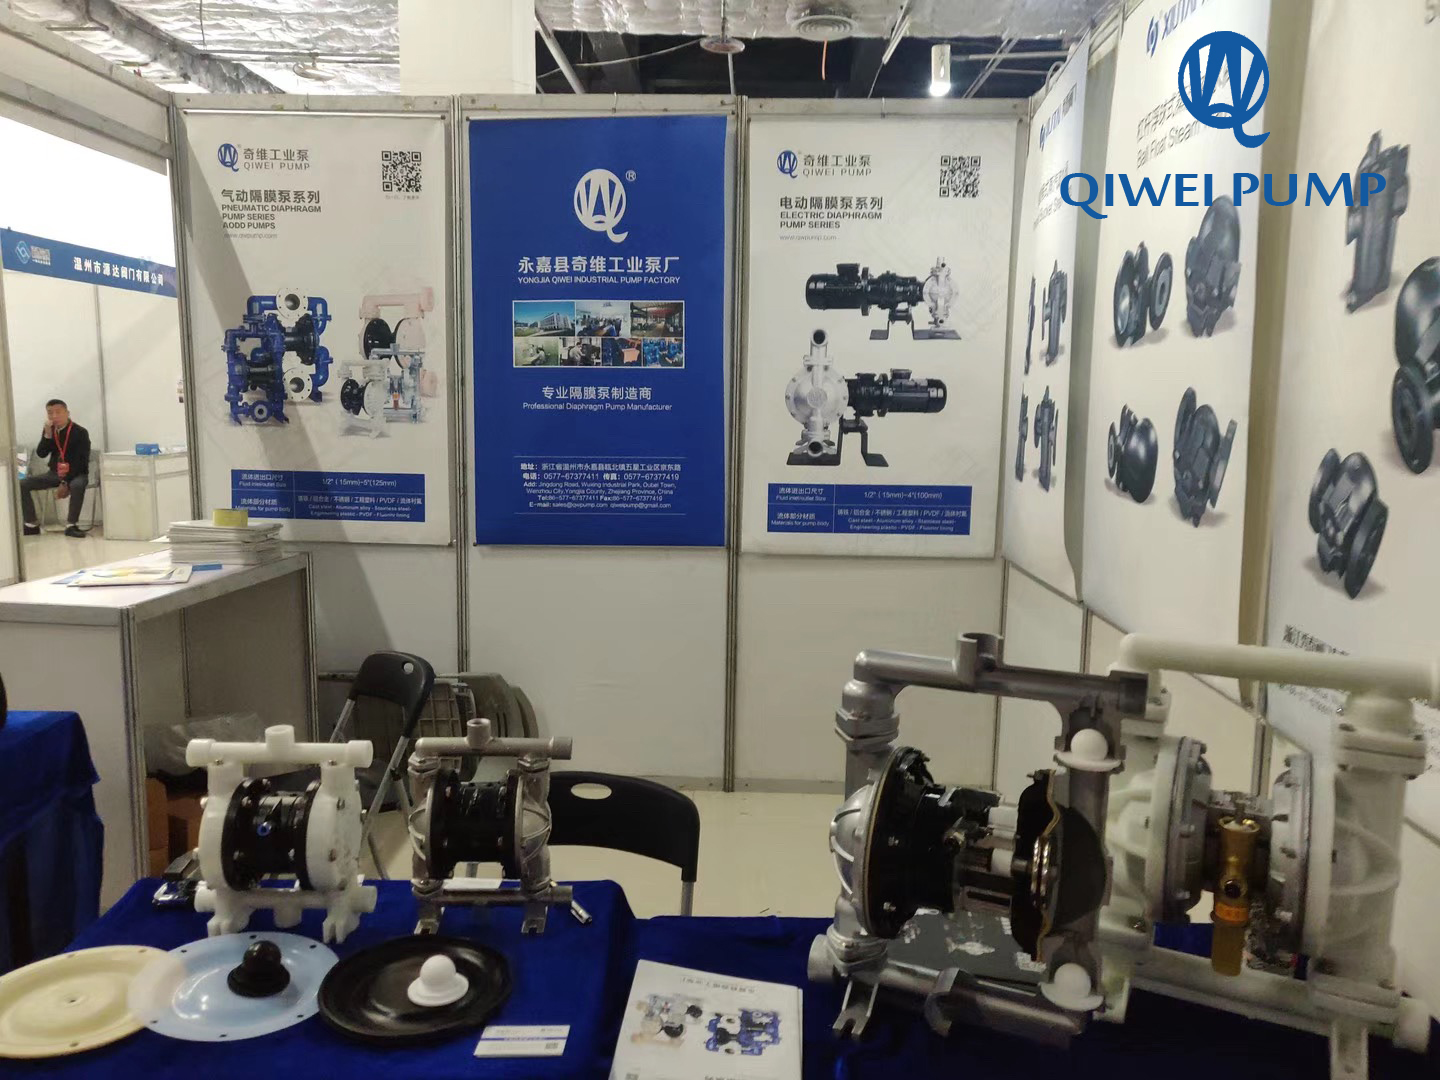 QIWEI INDUSTRIAL PUMP 2019 China (Zibo) General Machinery Exposition and pump Valve Chemical equipme